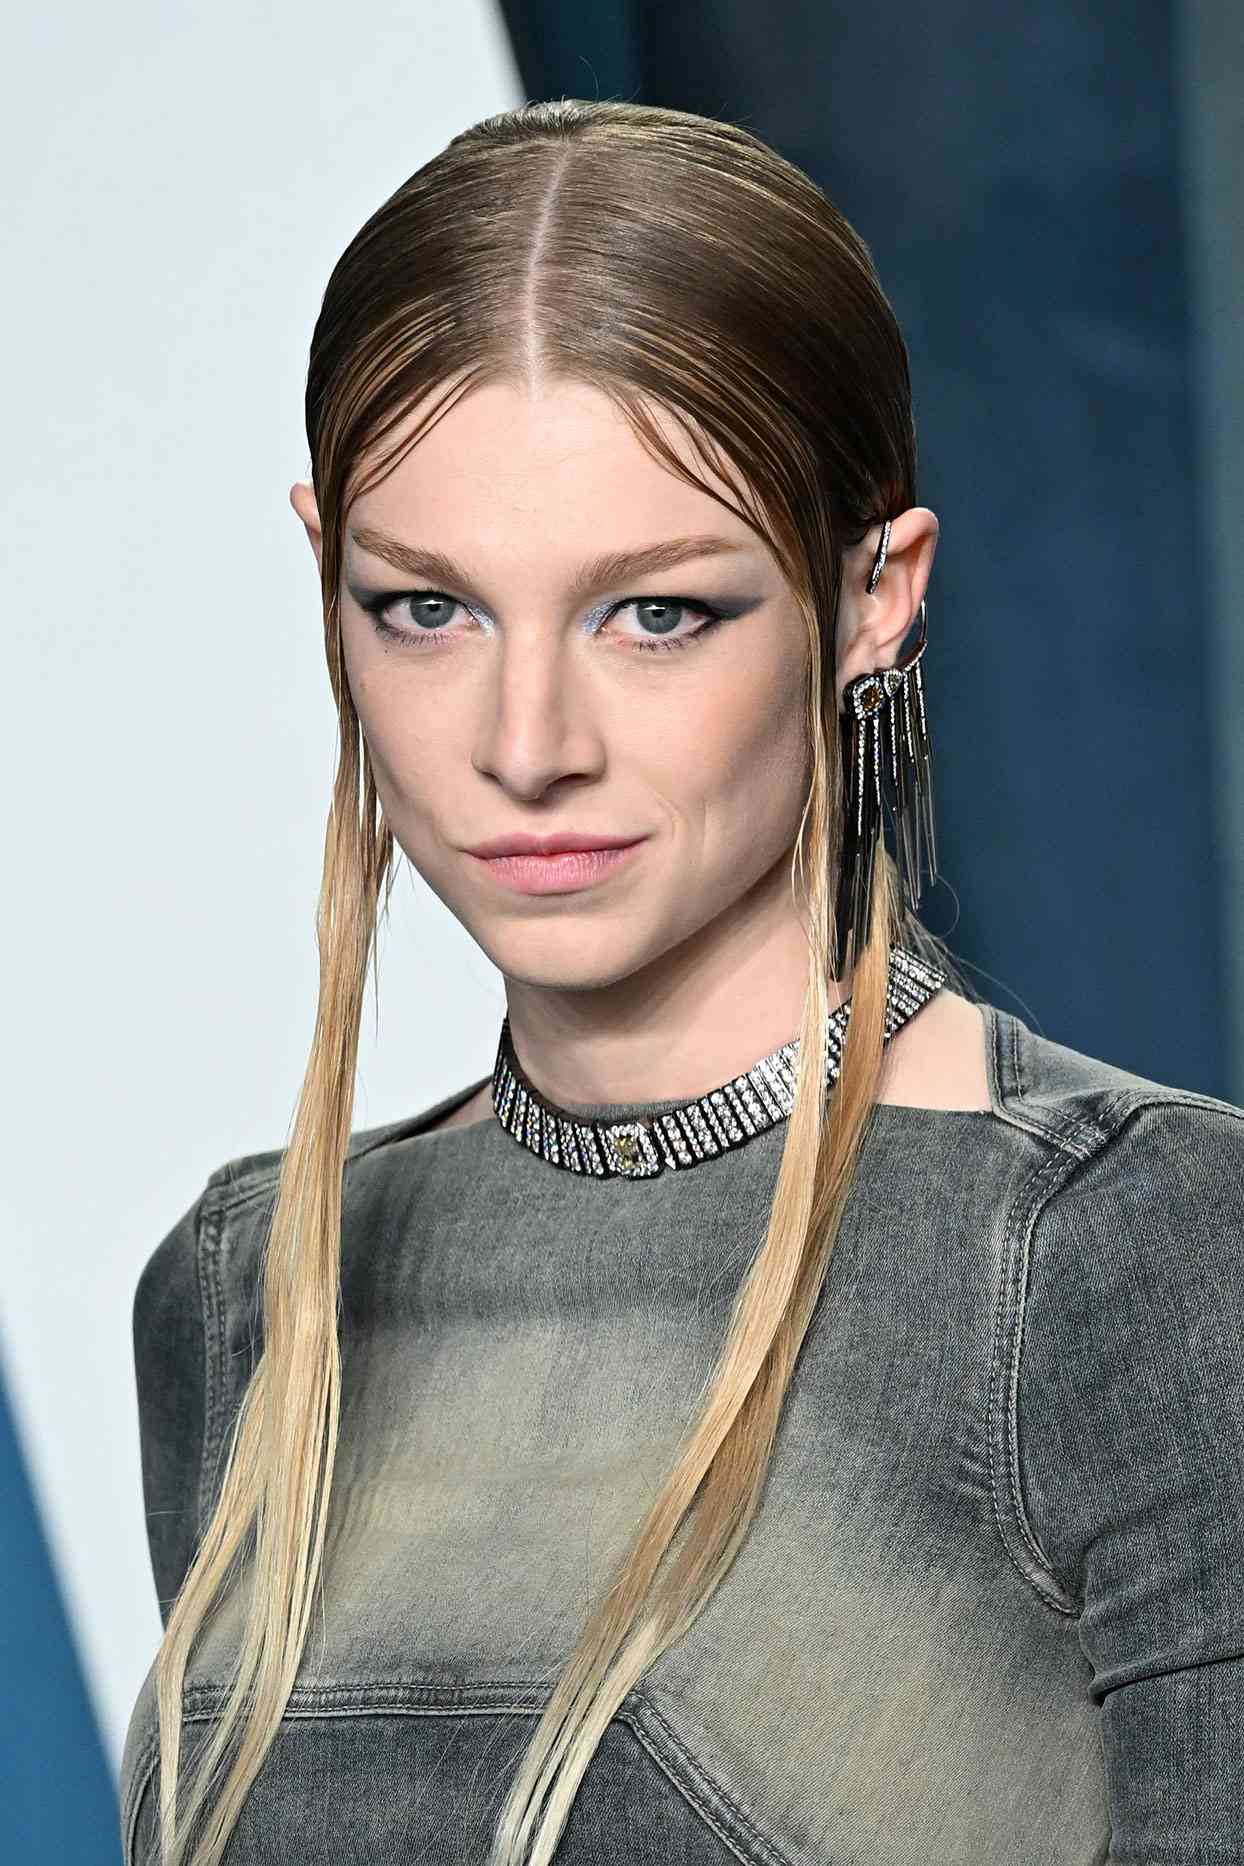 Sleek Center Part with Slicked-Back Hair